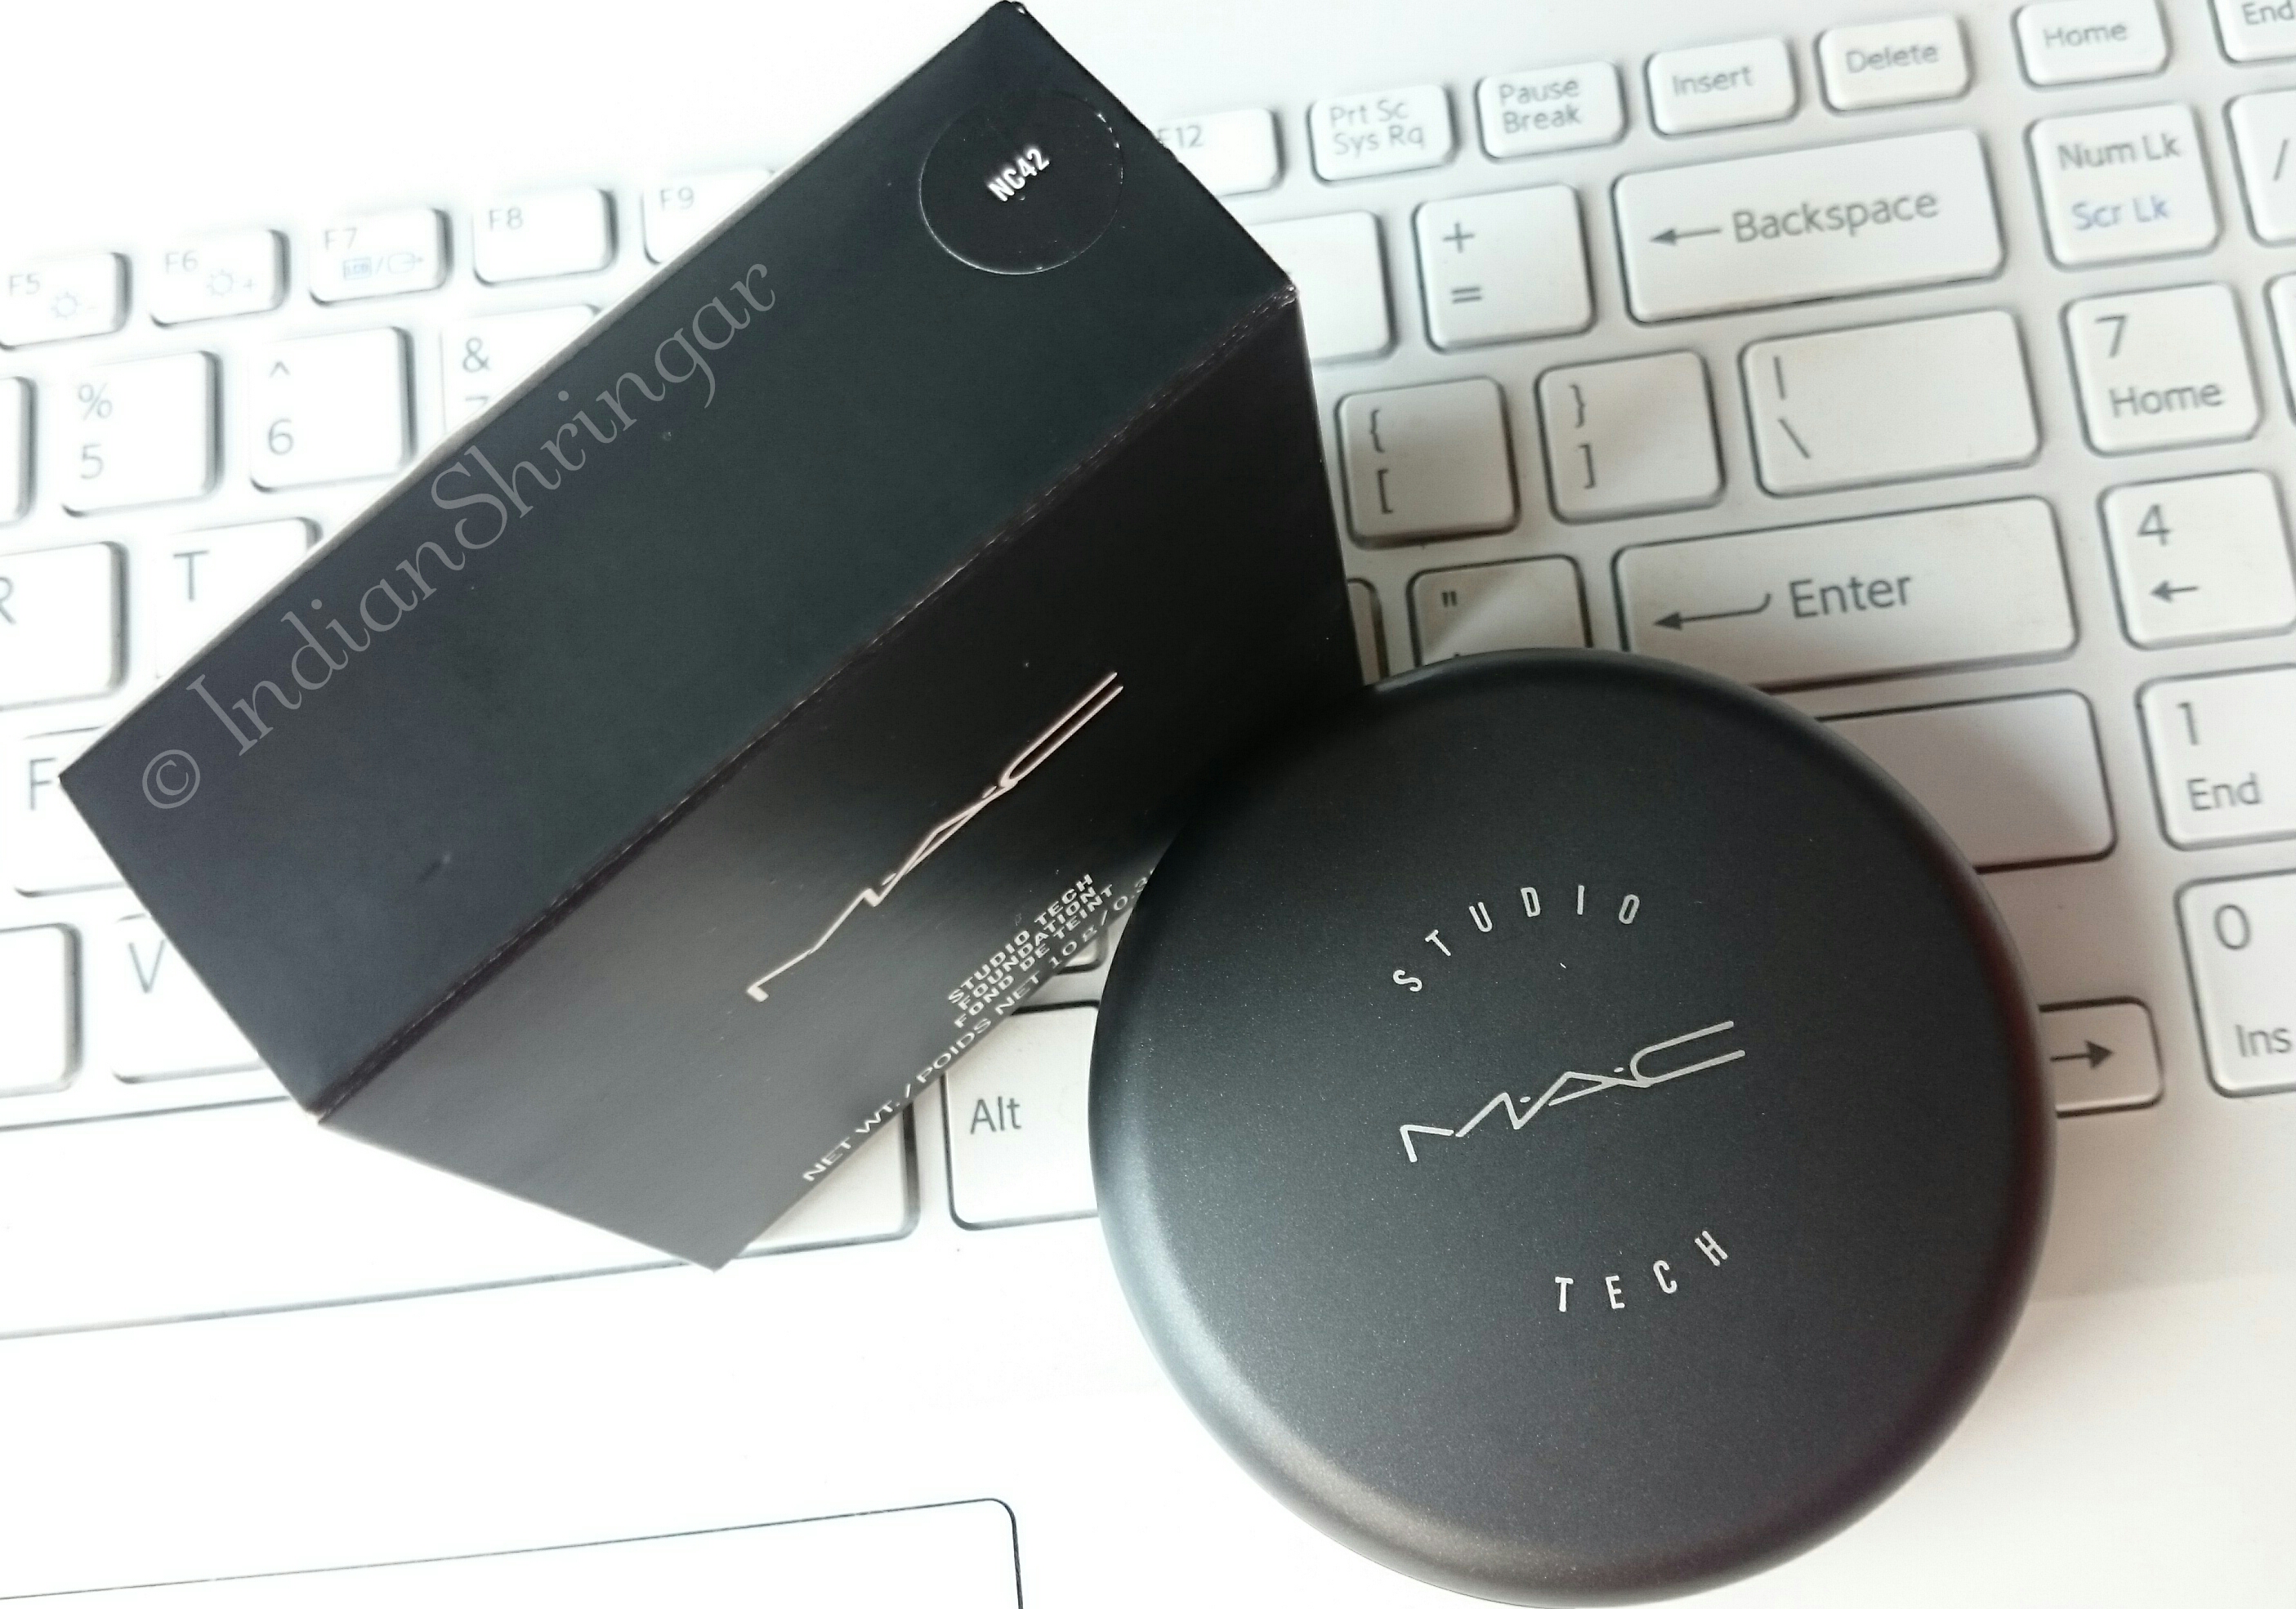 MAC Studio Tech Foundation in NC42 review and swatch